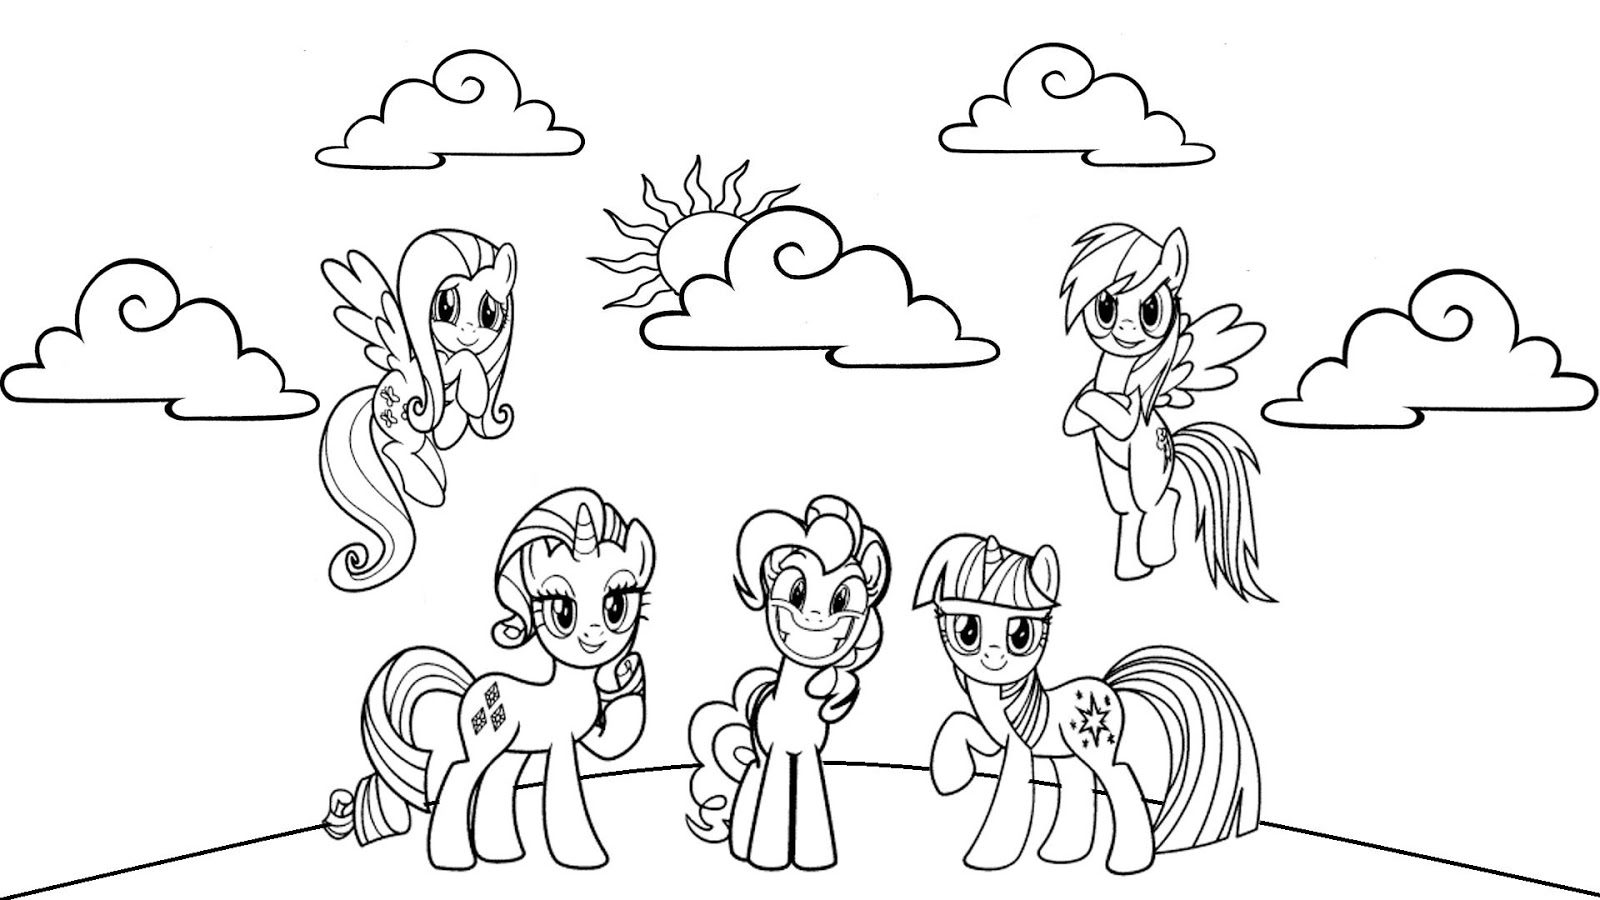 My Little Pony Friendship Is Magic Coloring Pages at GetColorings.com